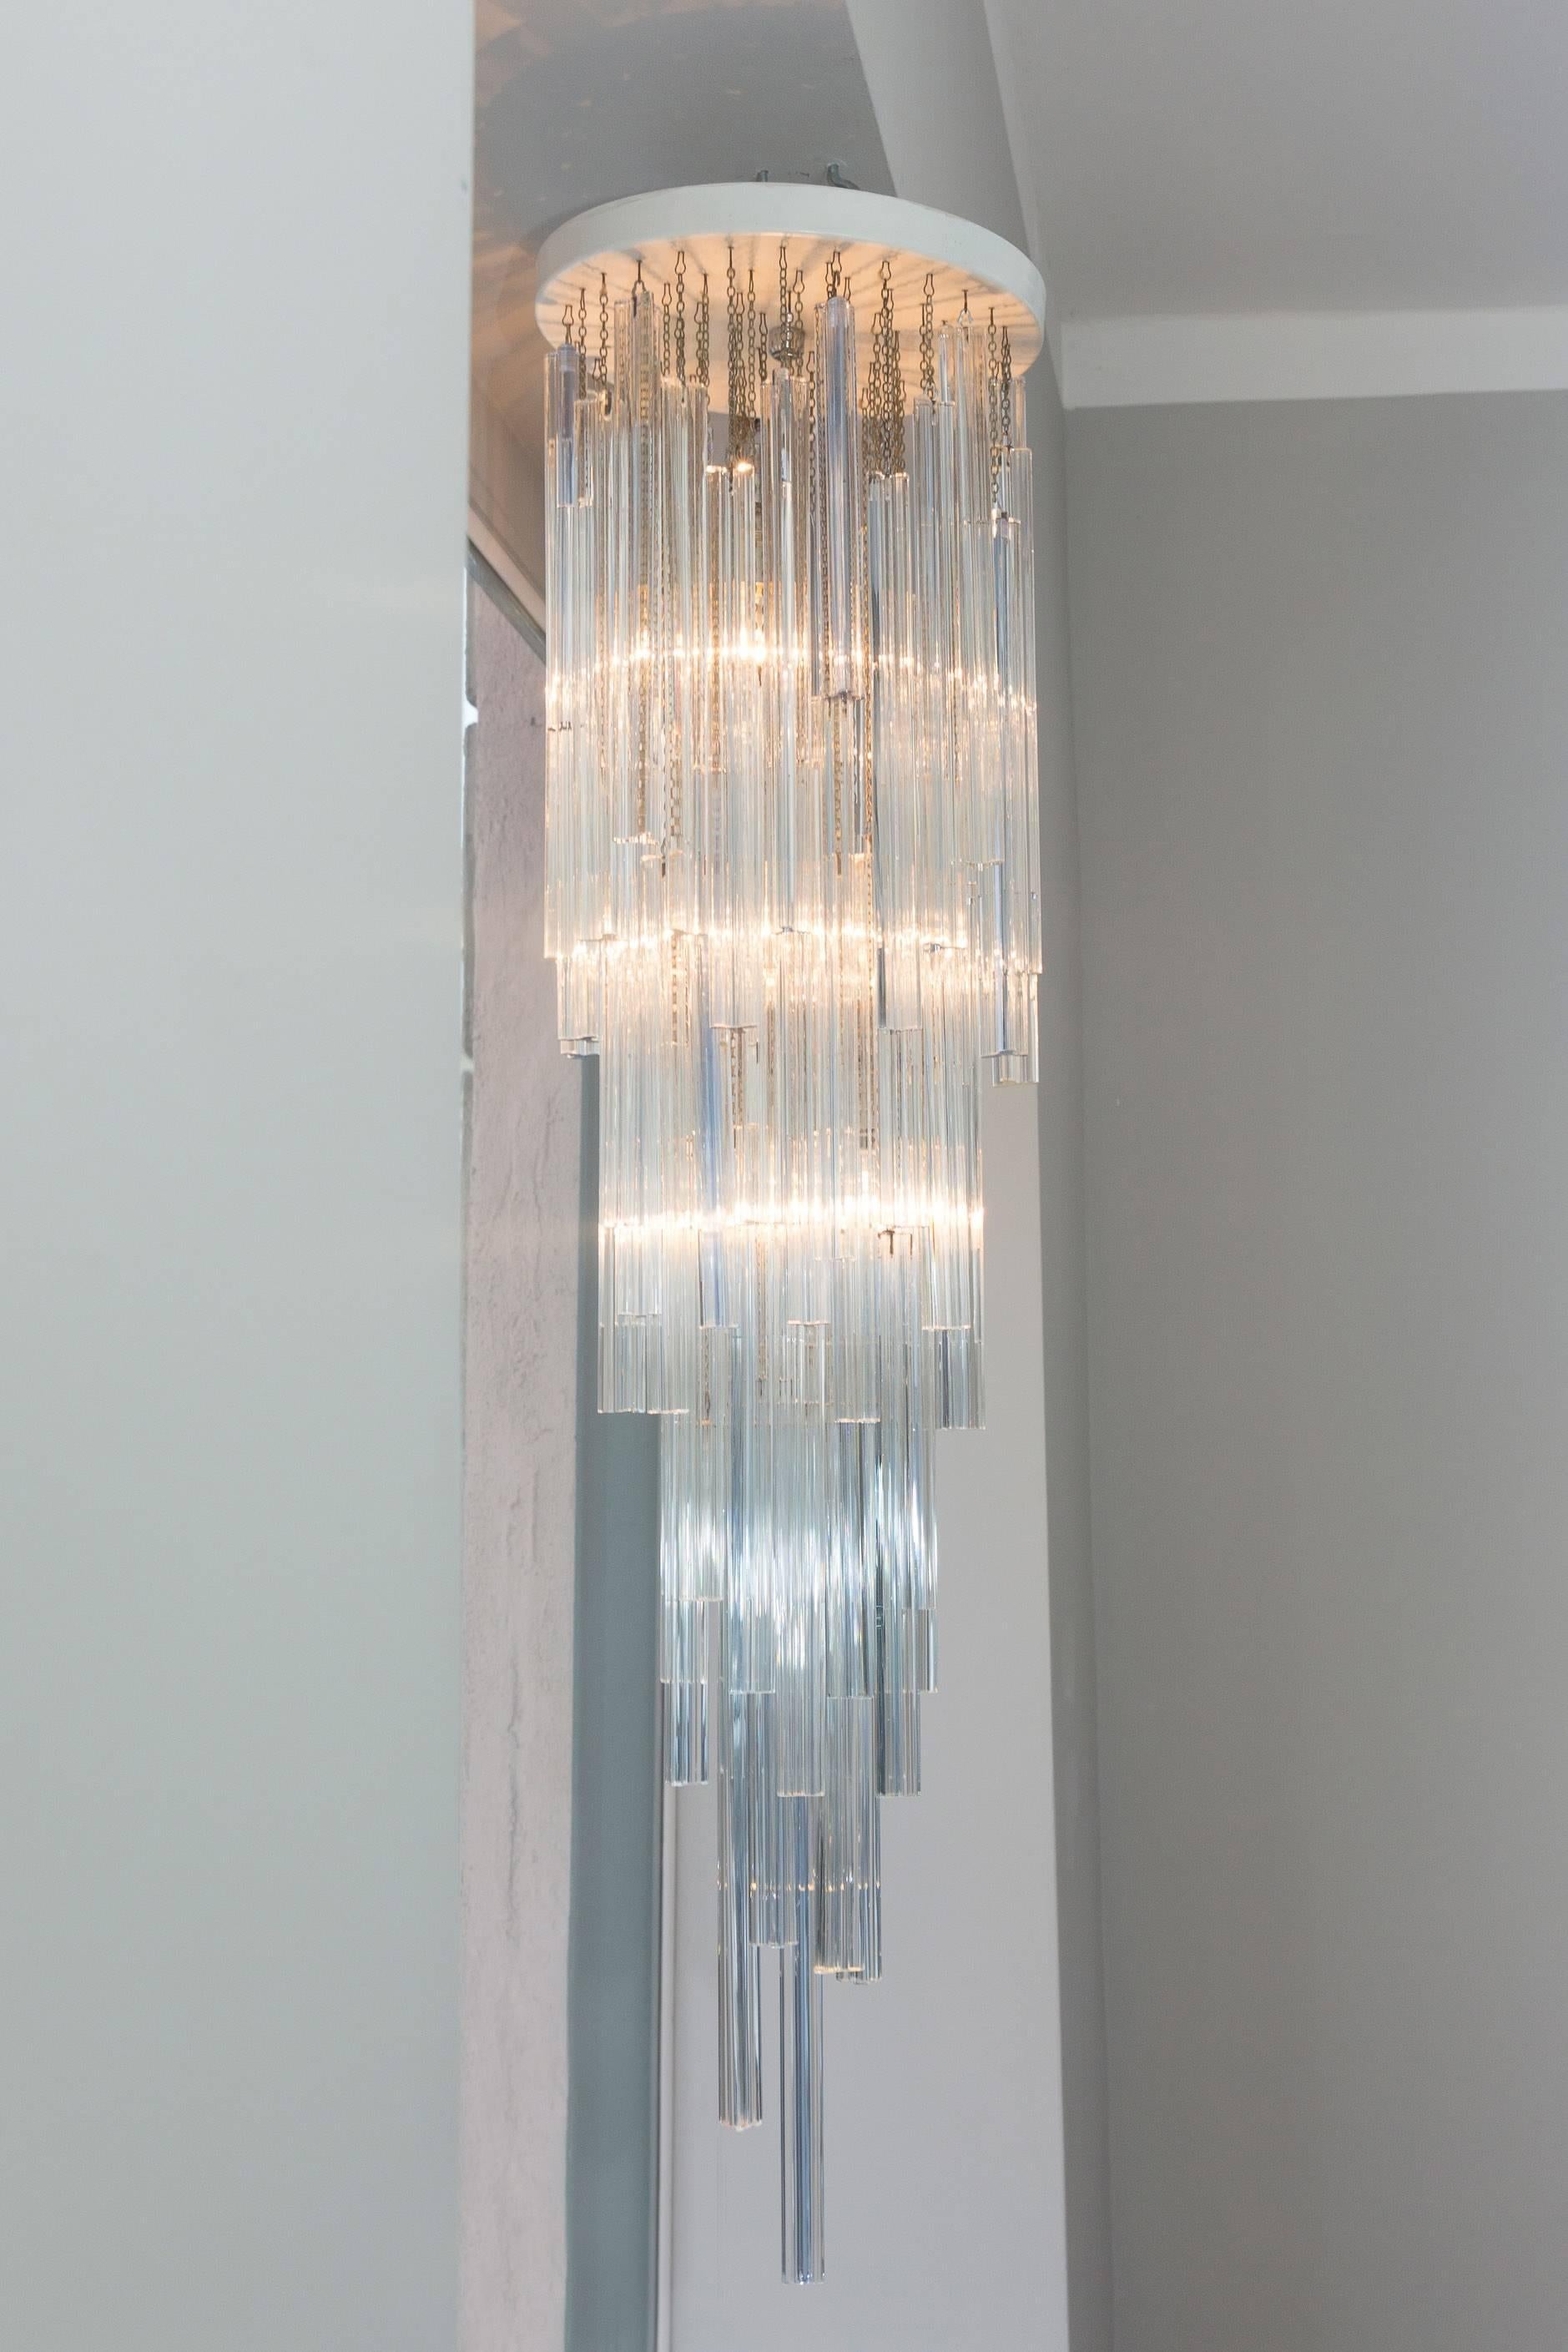 Elegant chandelier by Prod. Venini, Italy, circa 1970.
Series Trilobo transparent and aquamarine Murano glass, chromed metal chains, white lacquered metal plate, chrome light suspension, three bulbs, height 134 cm, diameter 36 cm.
Perfect